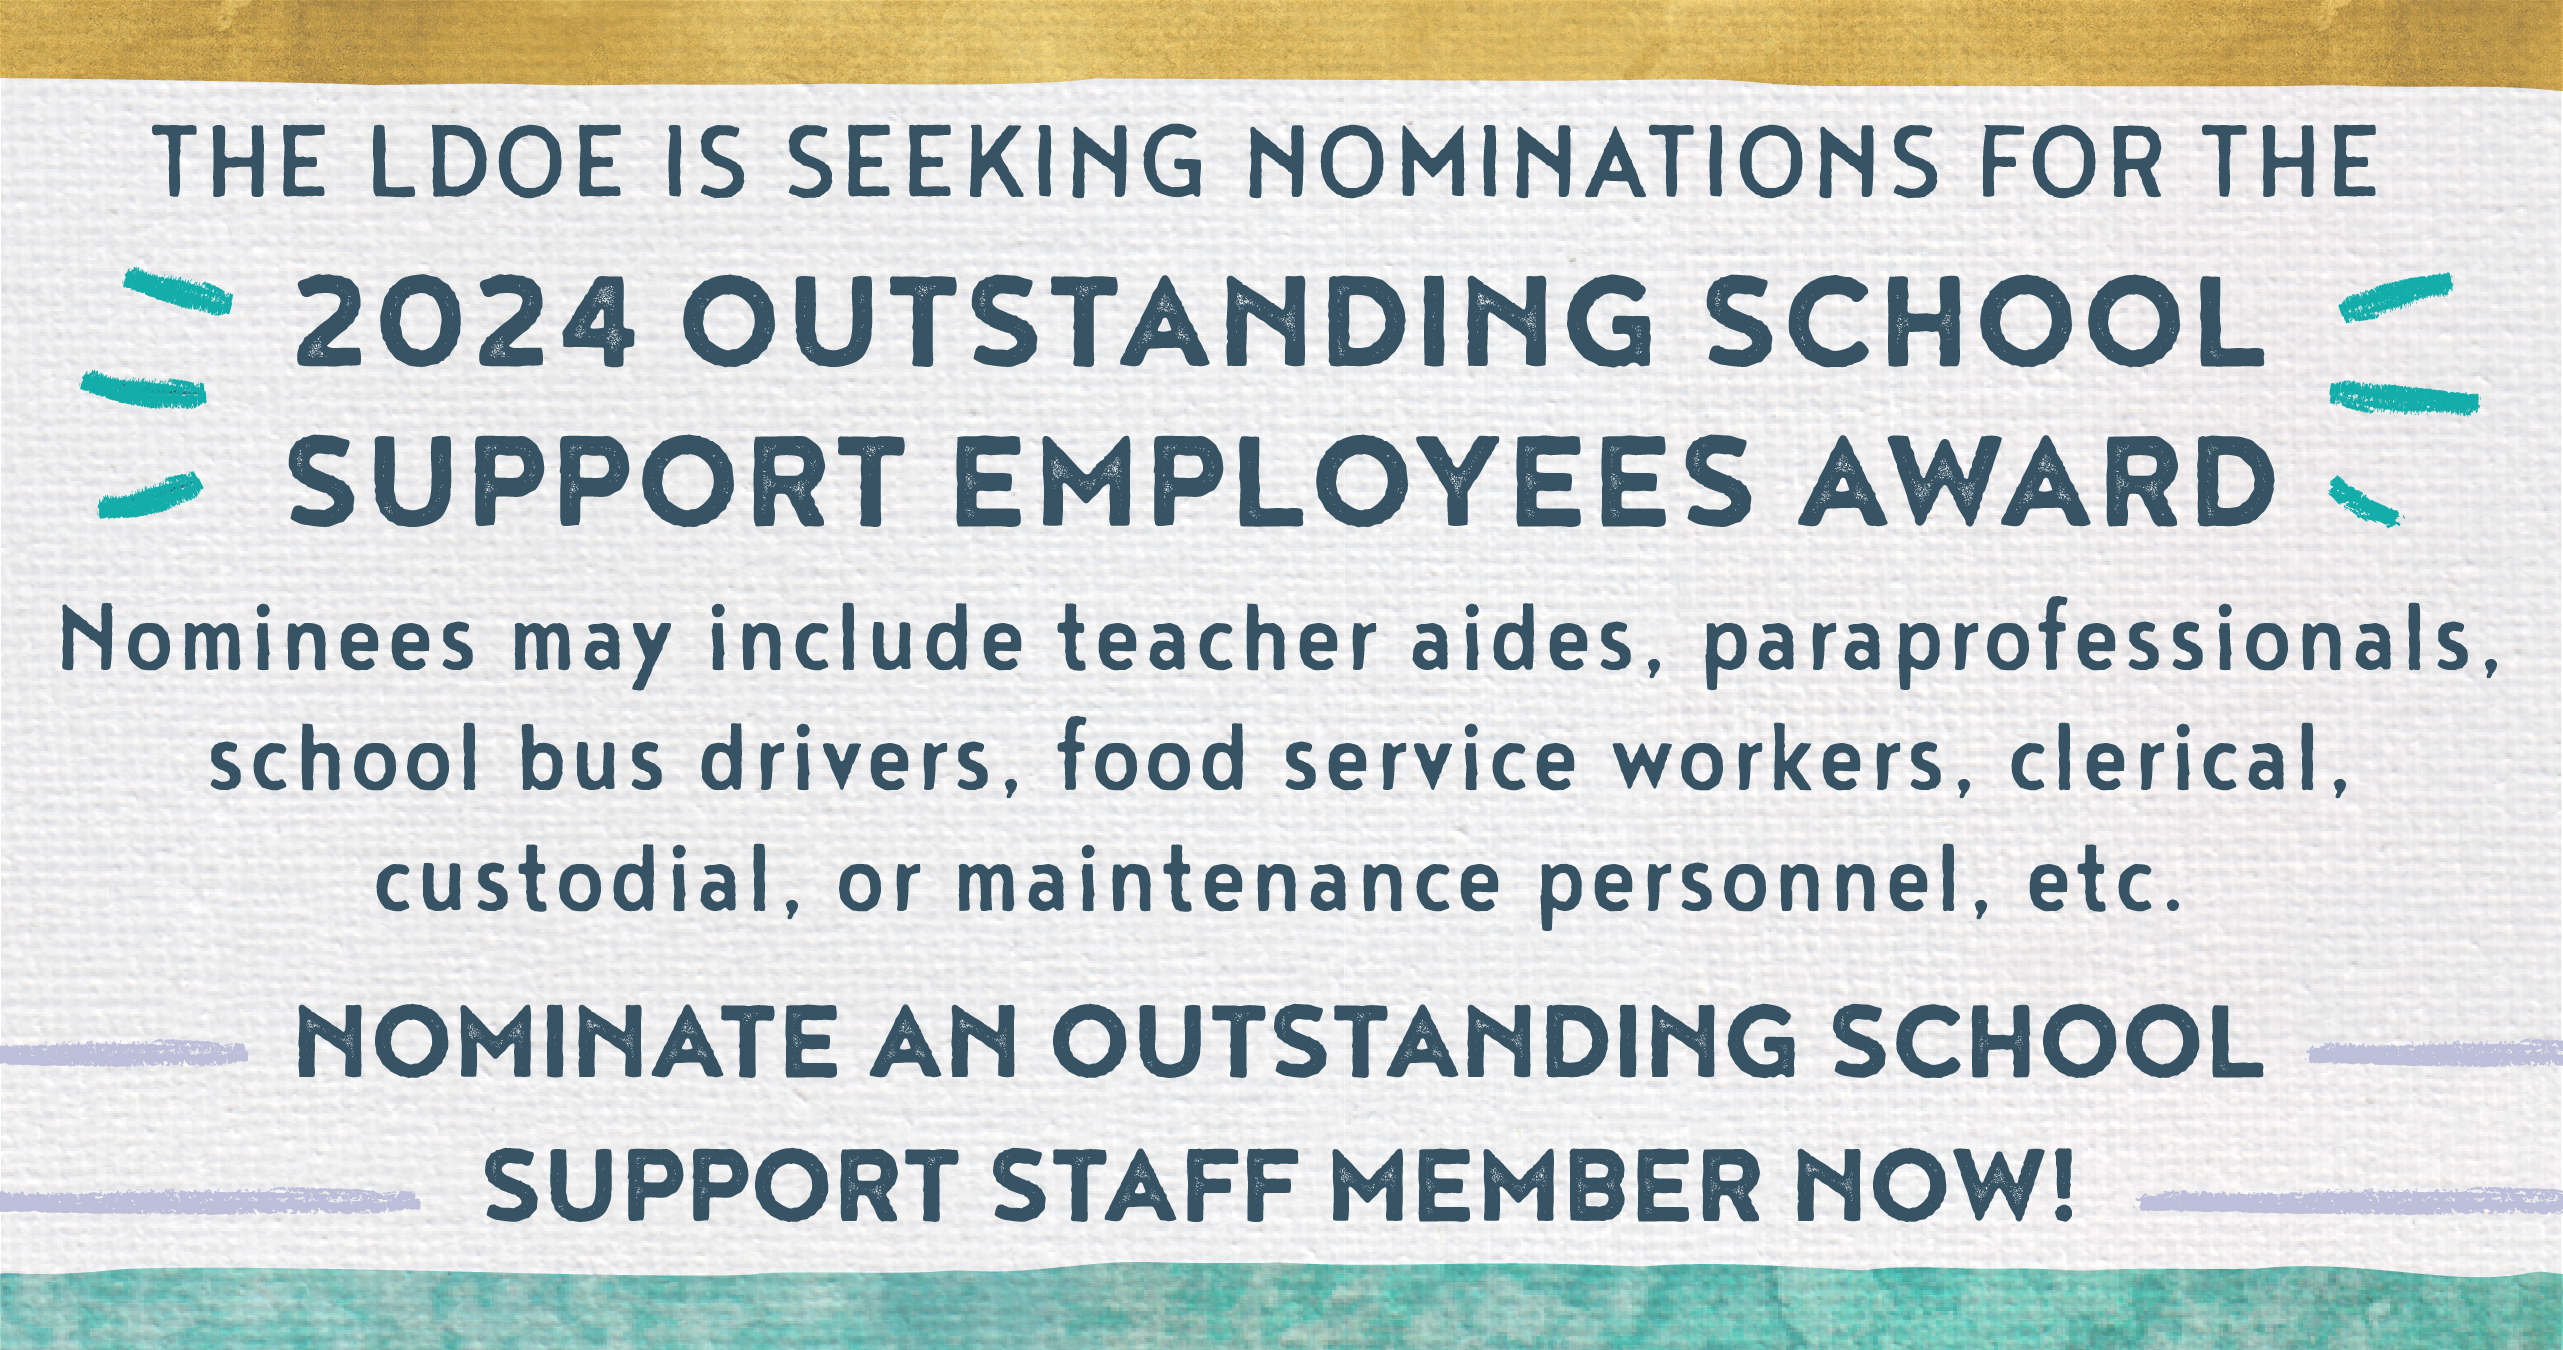 THE LDOE IS SEEKING NOMINATIONS FOR THE 2024 OUTSTANDING SCHOOL SUPPORT EMPLOYEES AWARD. NOMINATE AN OUTSTANDING SCHOOL SUPPORT STAFF MEMBER NOW!